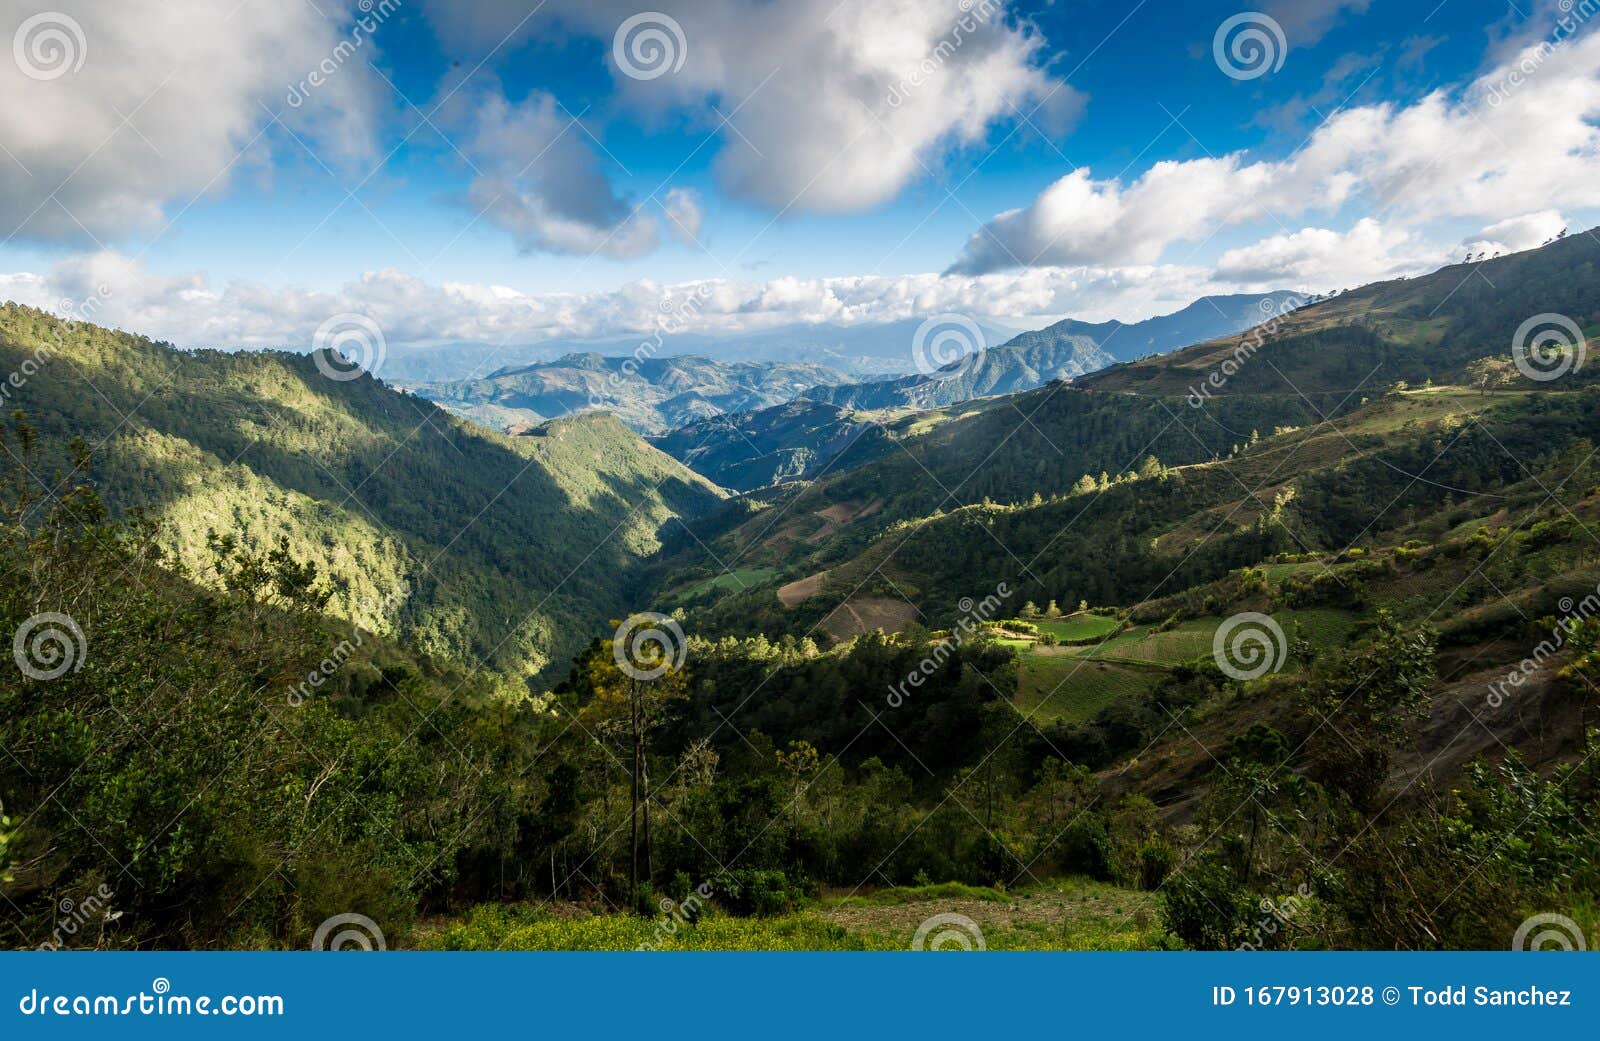 dramatic landscape image of the caribbean mountains in the dominican republic.